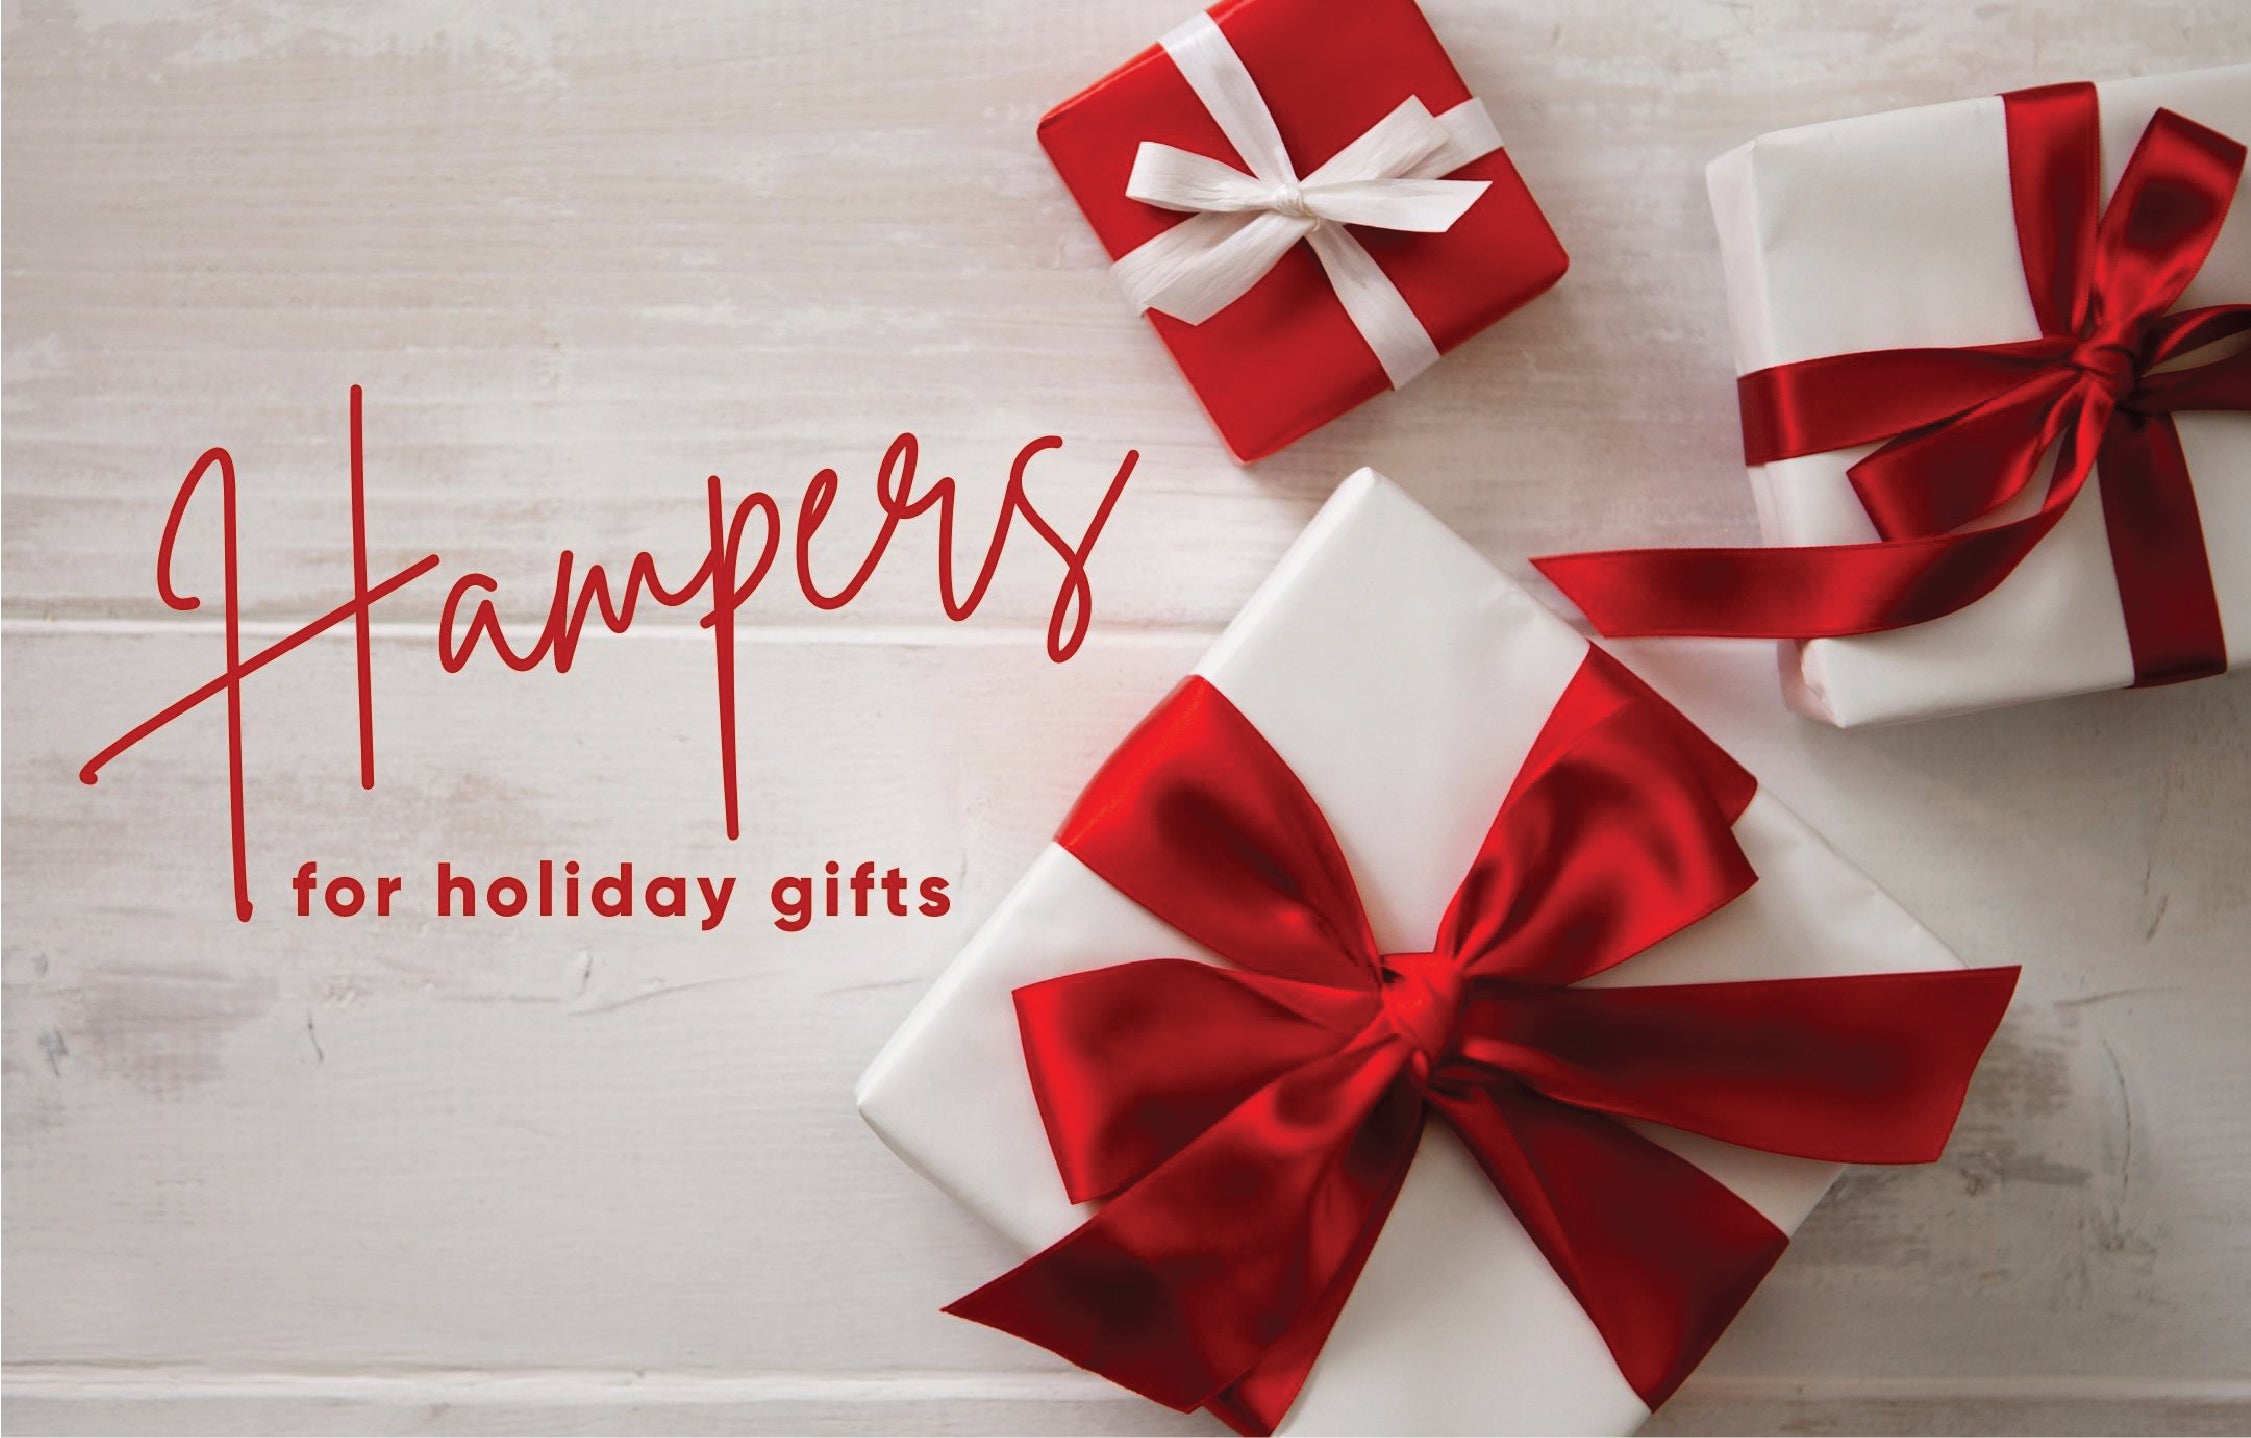 HAMPERS FOR HOLIDAY GIFTS